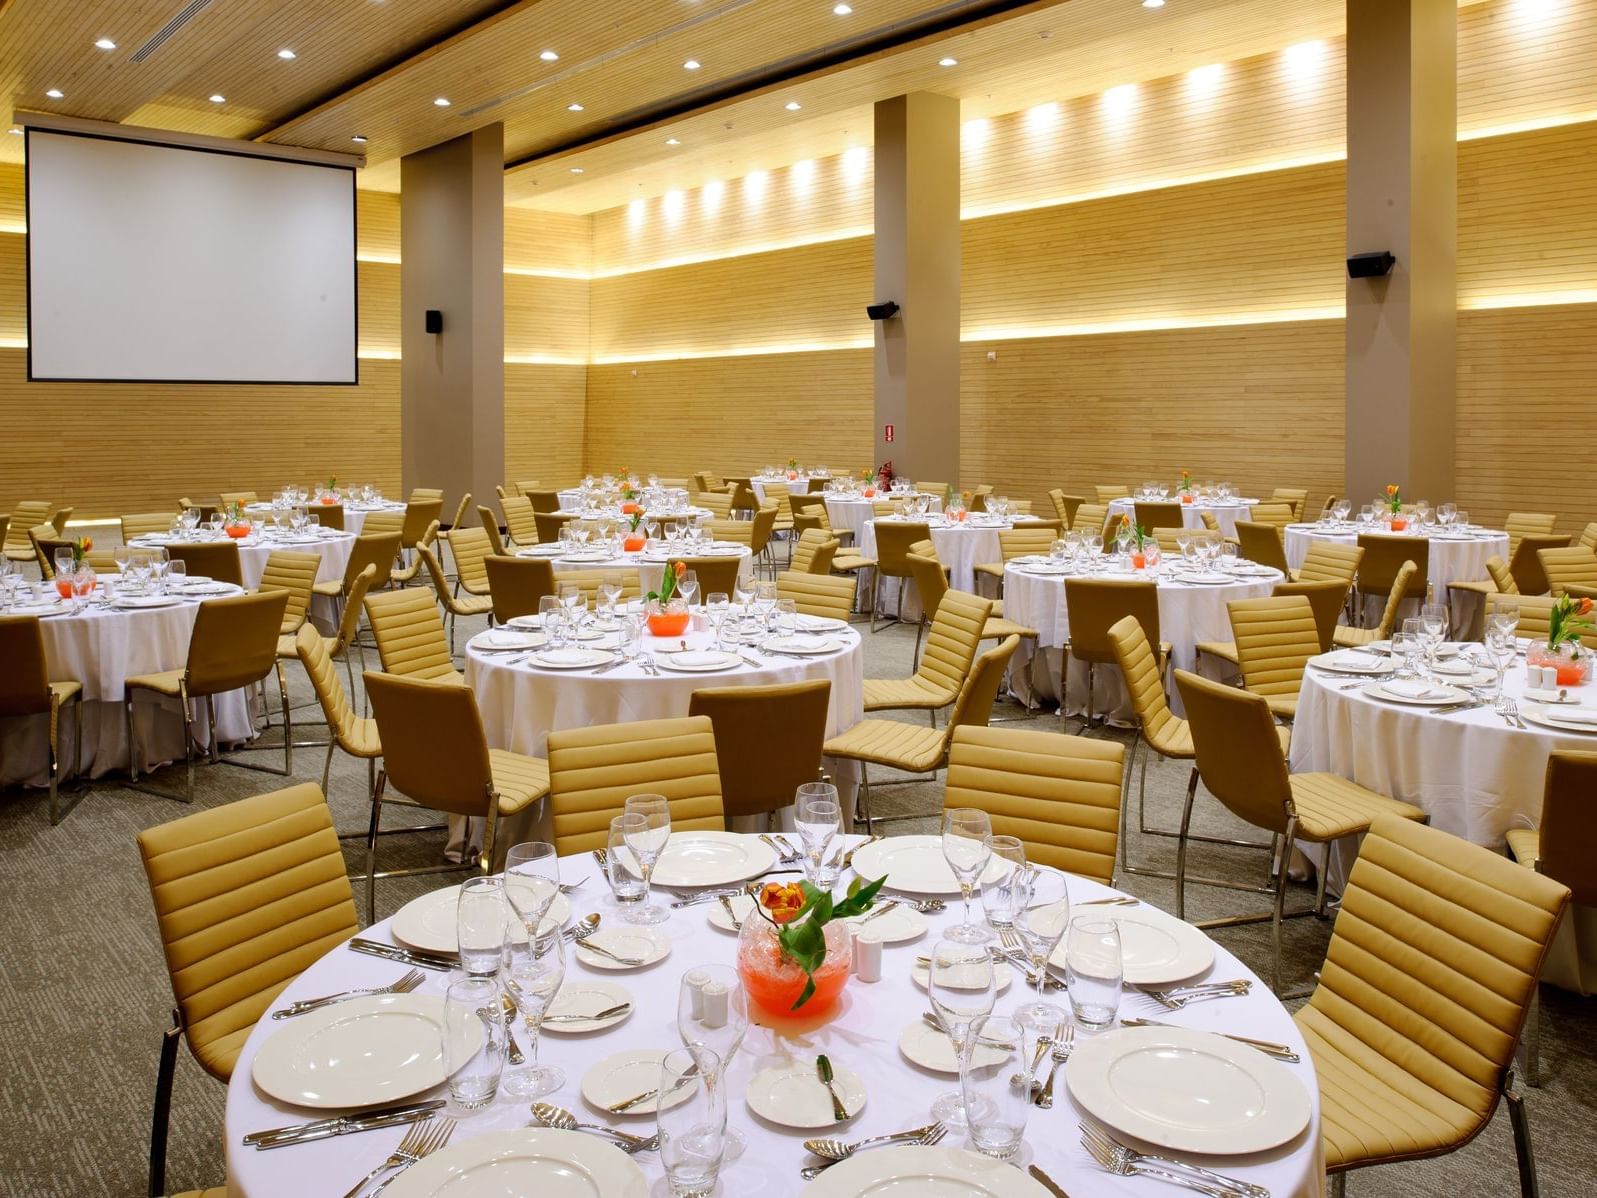 Mayo meeting room for events at NOI Vitacura hotel       